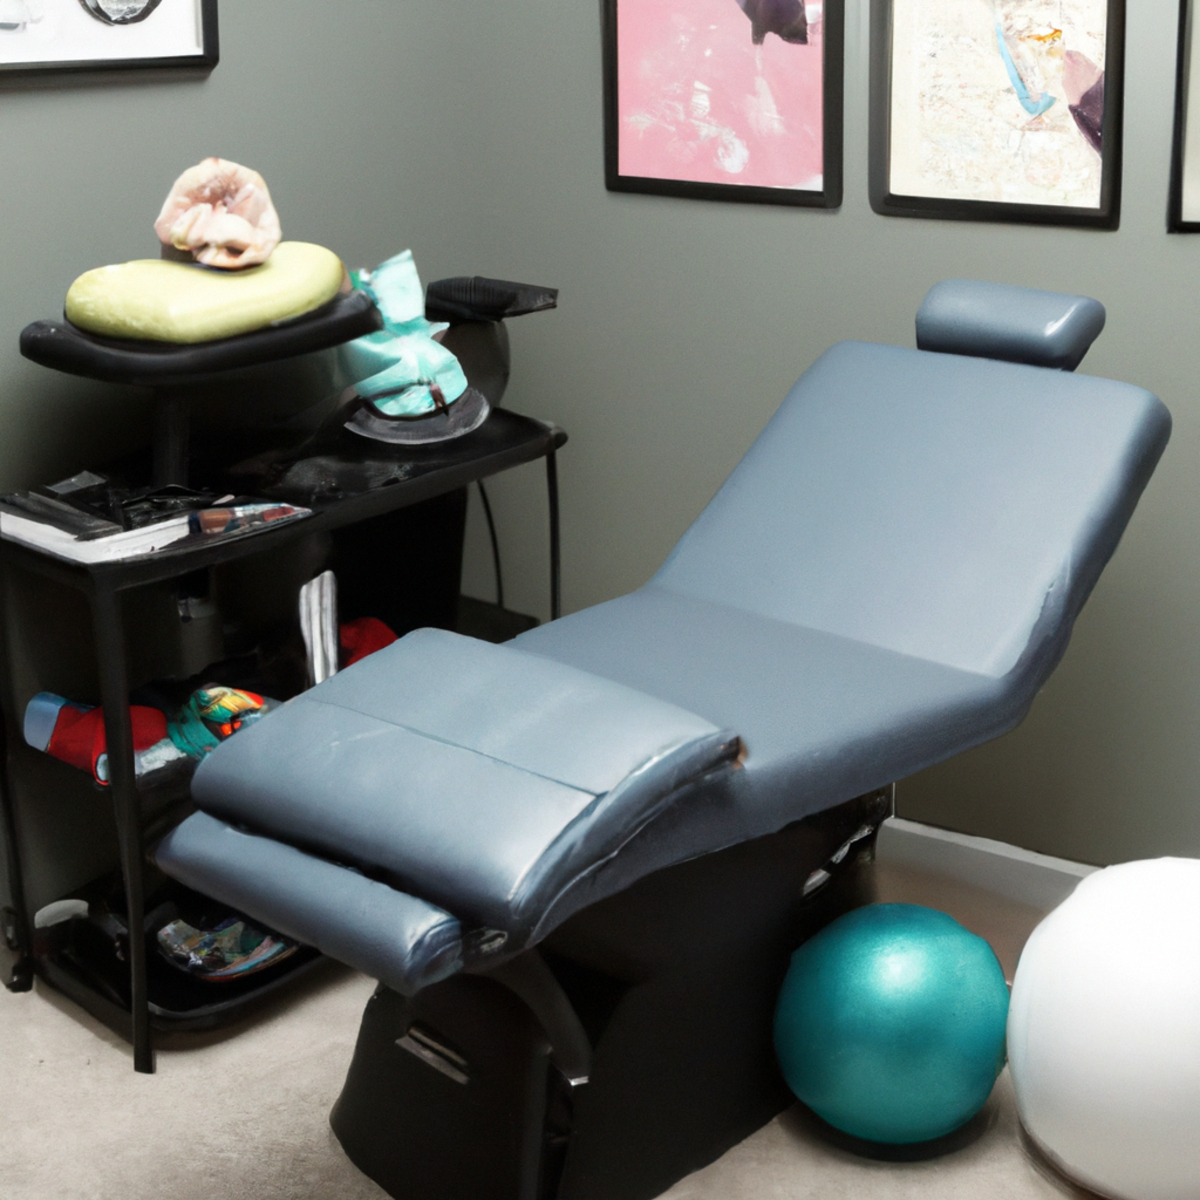 A serene therapy room with a cozy chair, sensory toys, calming mural, and therapeutic books for Floating-Harbor Syndrome.